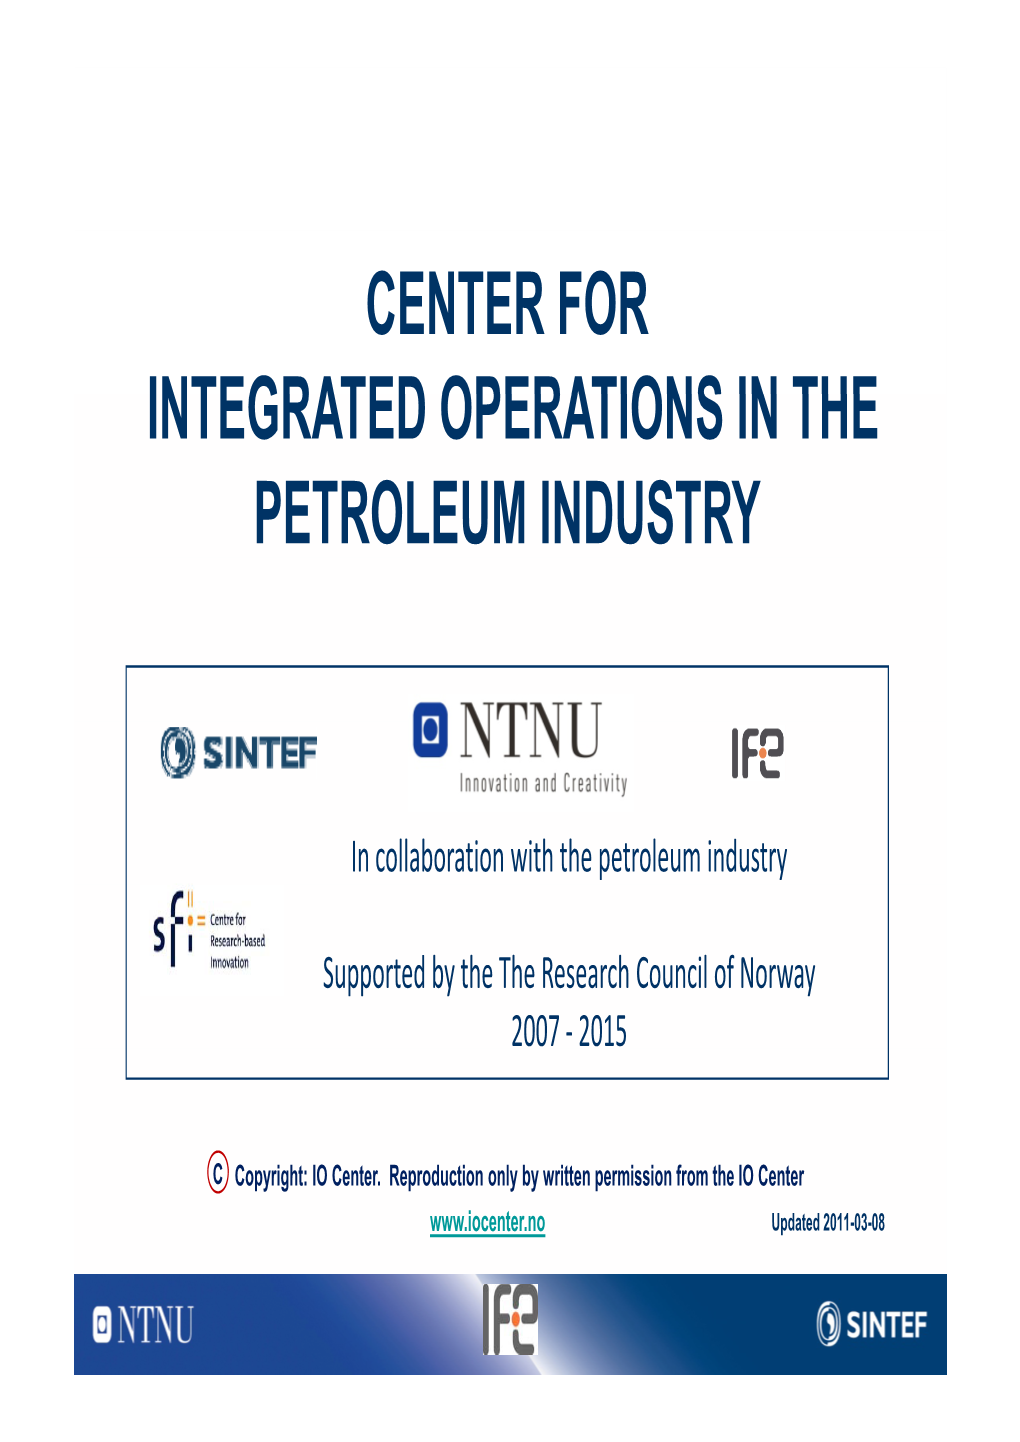 Center for Integrated Operations in the Petroleum Industry